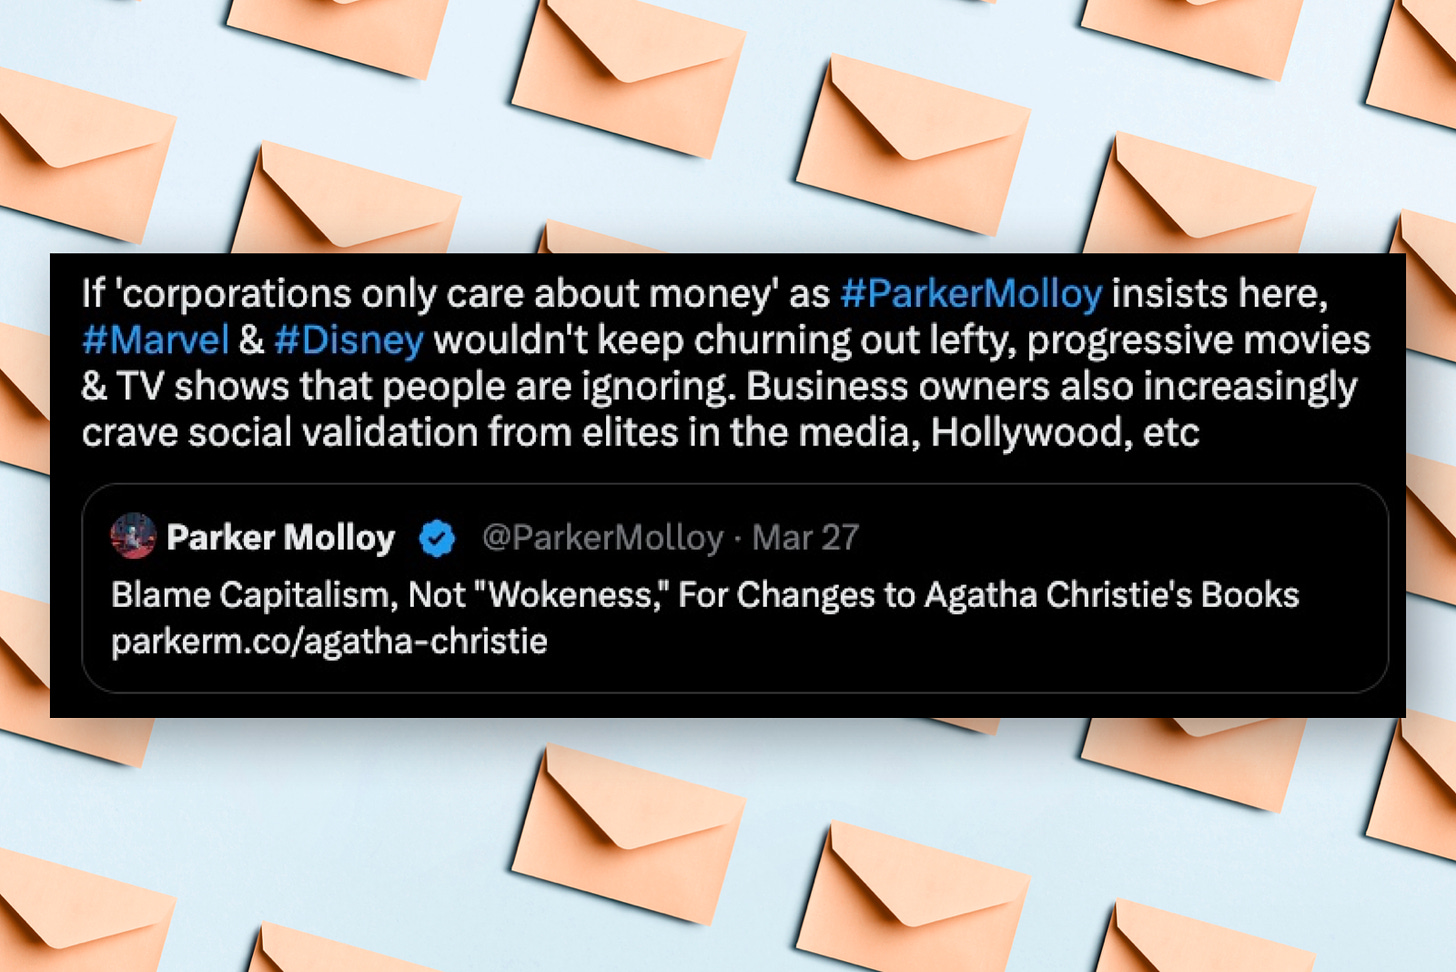 “If ‘corporations only care about money,’ as Parker Molloy insists here, Marvel & Disney wouldn’t keep churning out lefty, progressive movies & TV shows that people are ignoring,” he wrote. “Business owners also increasingly crave social validation from elites in the media, Hollywood, etc.”